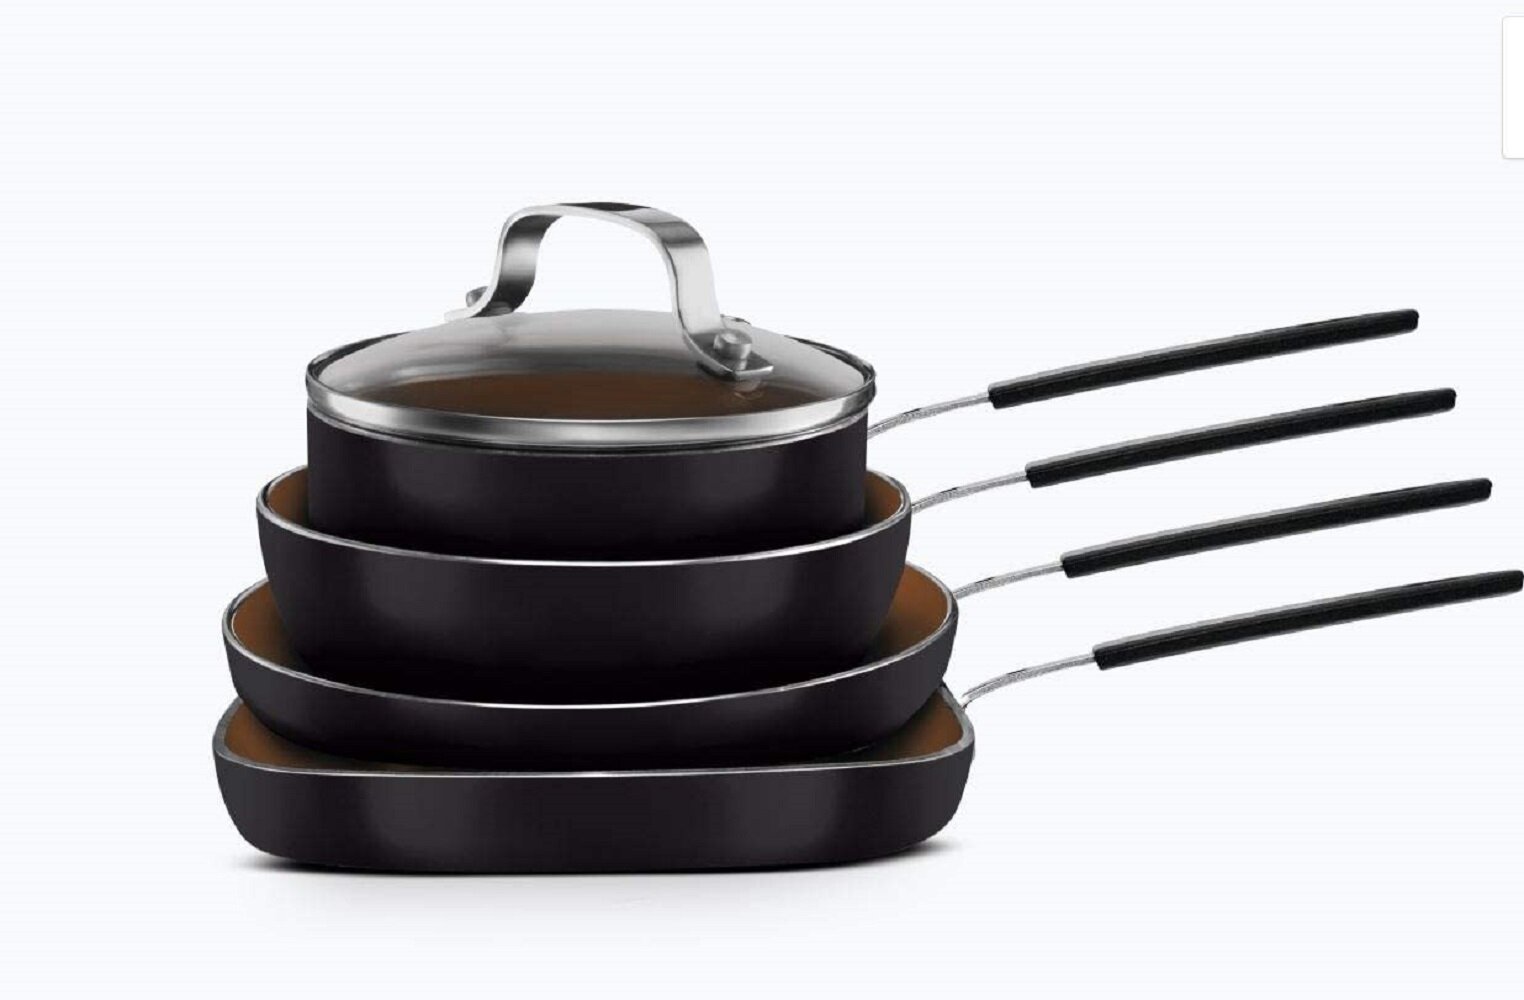 Details about   Gotham Steel Stackmaster 3 Piece Set Small Nonstick Space Saving Pans 